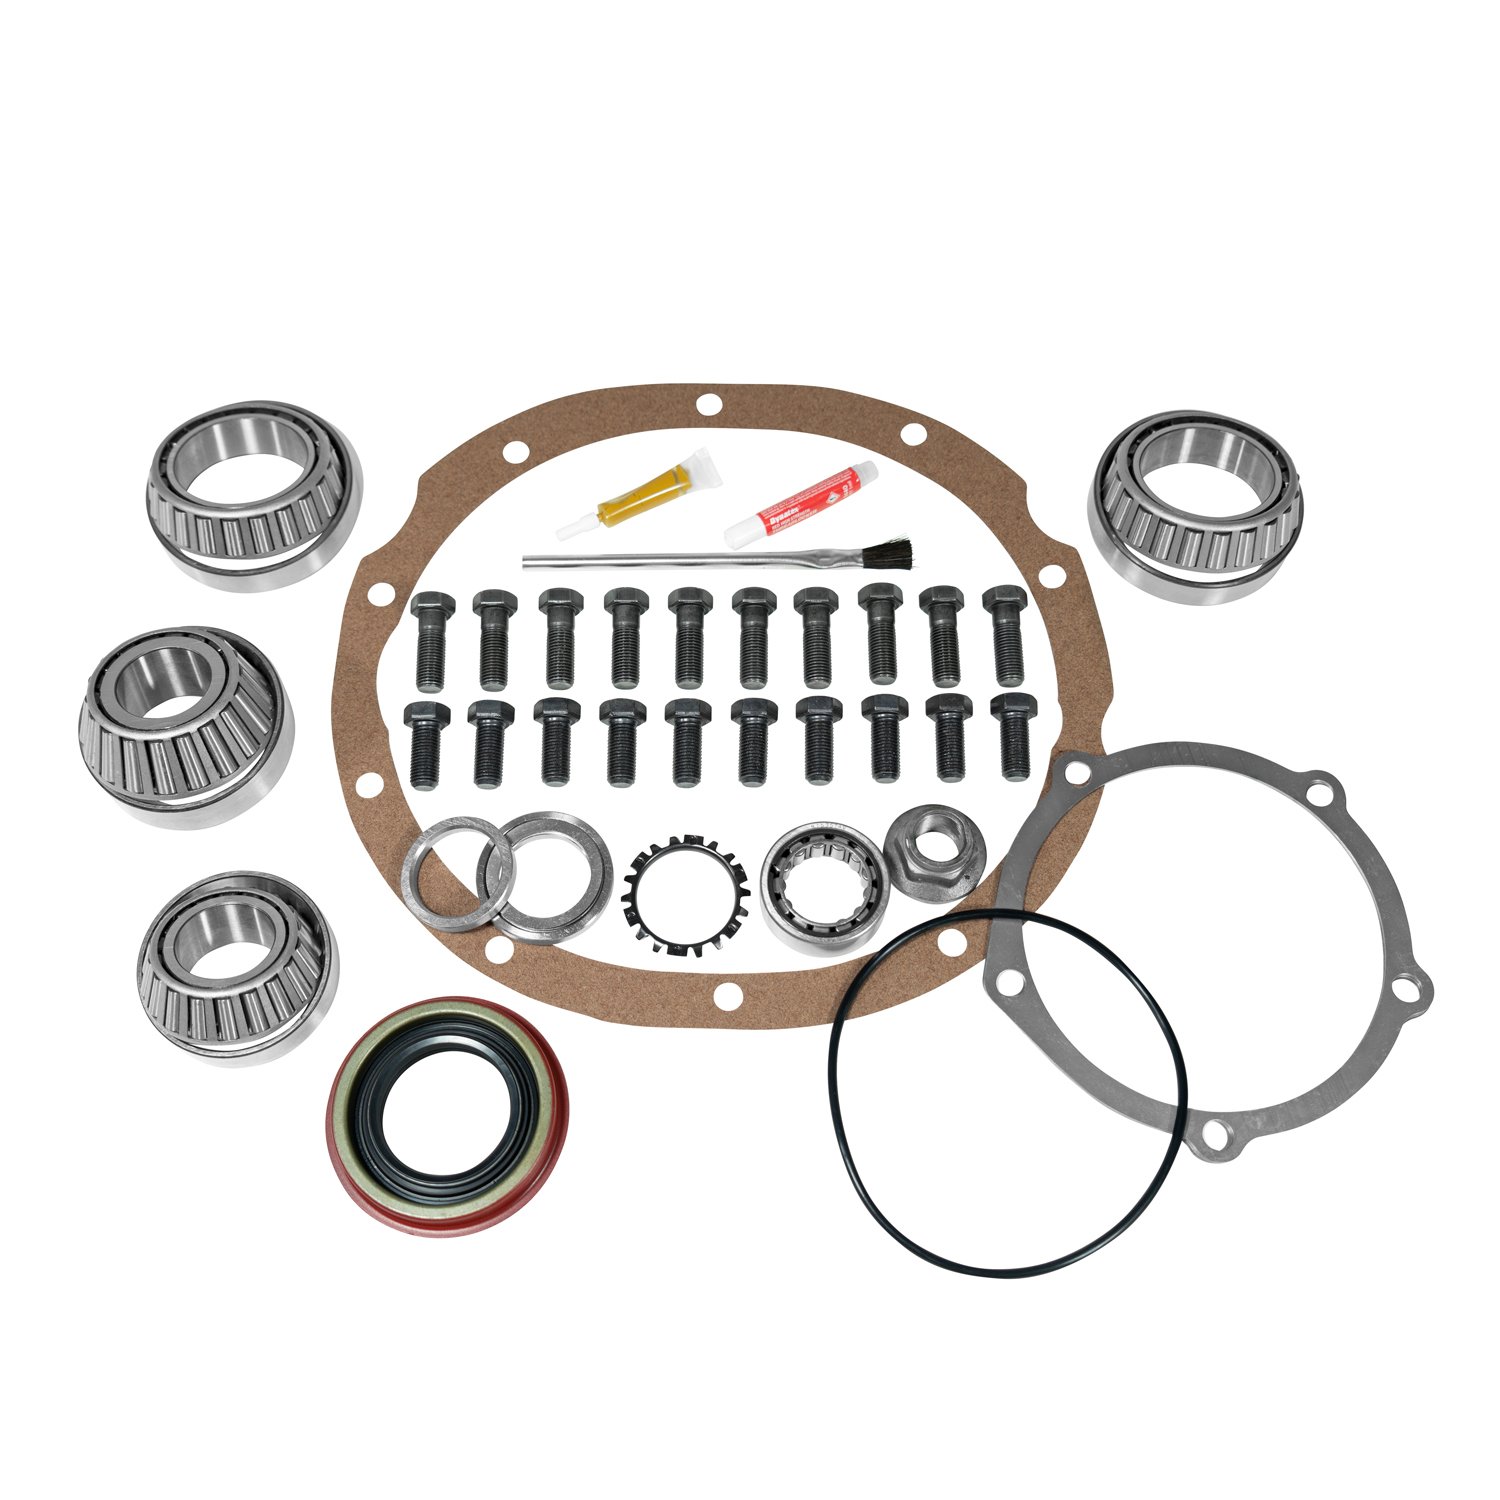 Master Overhaul Kit For Ford 9 in. Lm102910